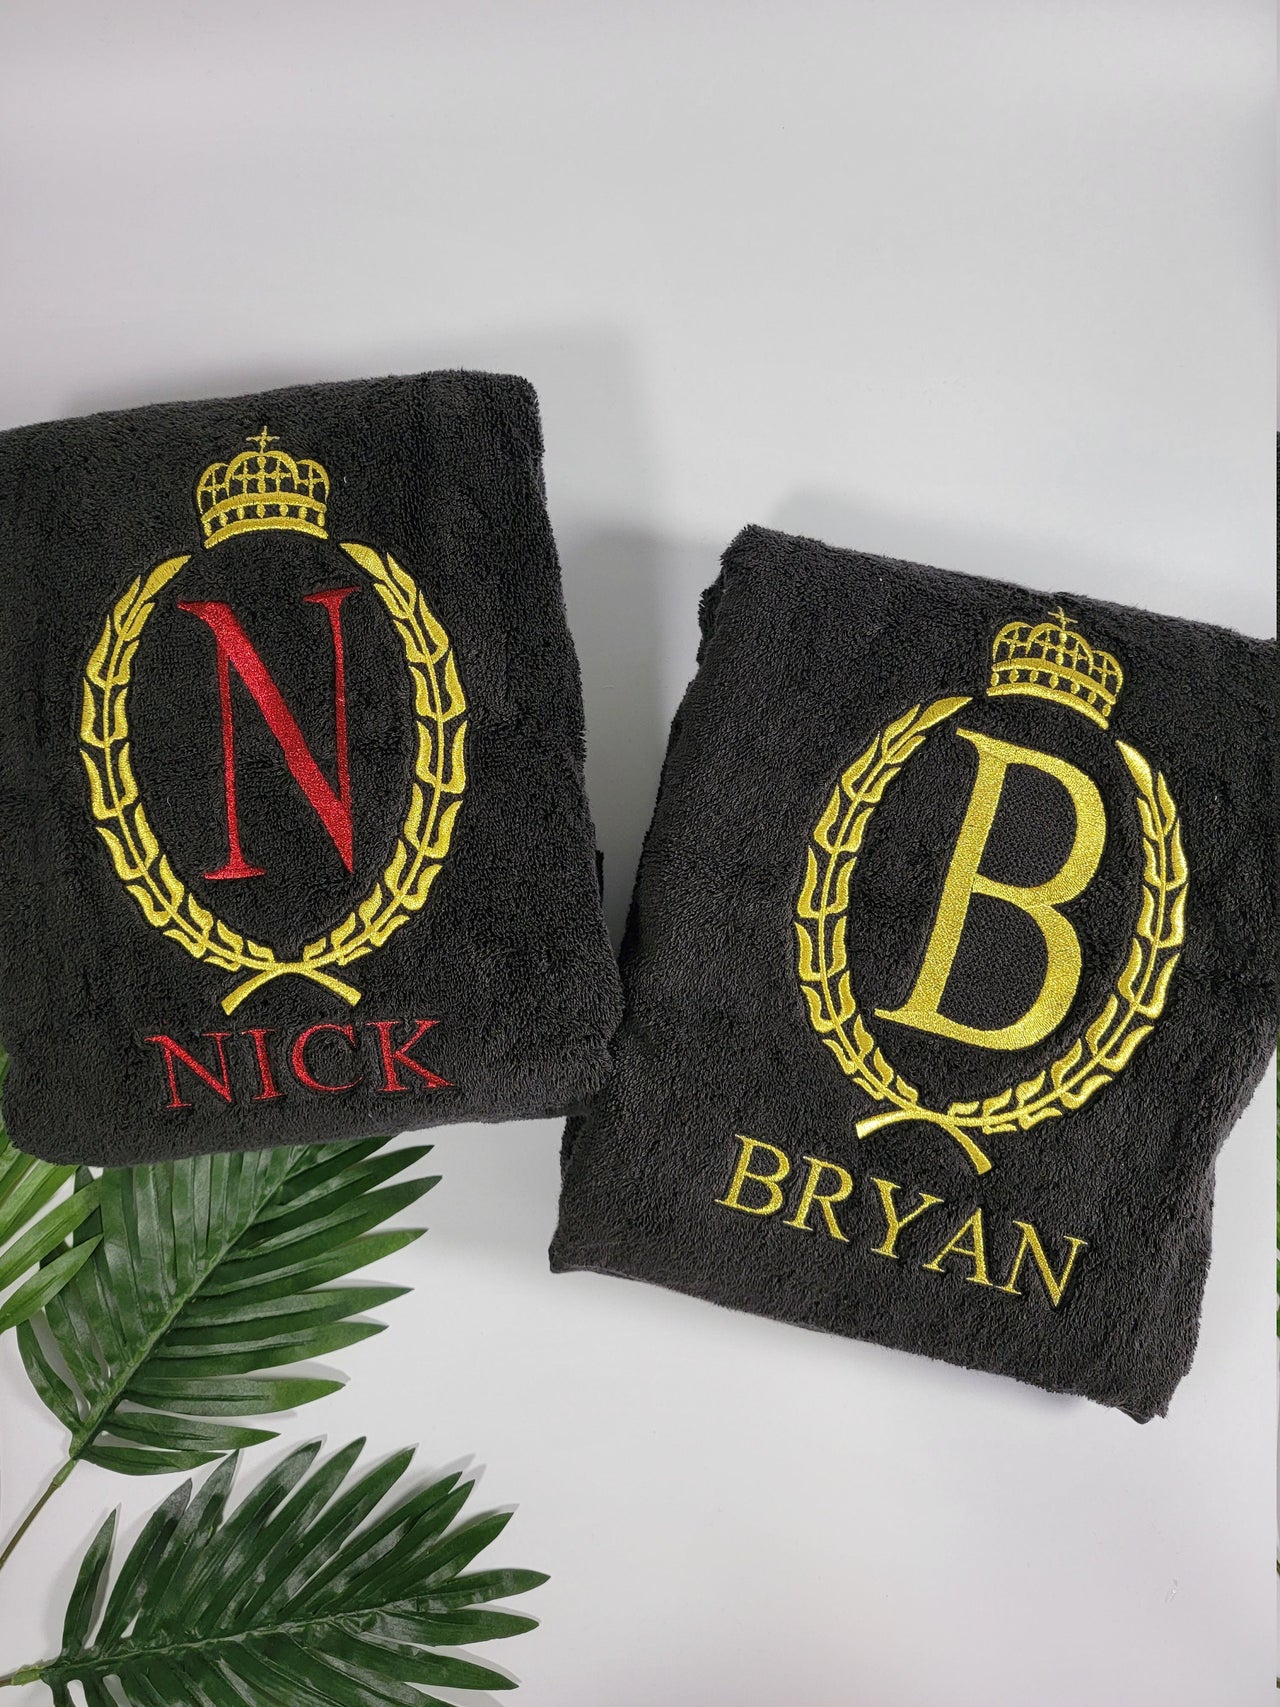 Personalized Bath Towel - Embroidered Monogrammed Towel with King Crown - Custom Embroidered Gift for Men- Embroidered Towel - Black Towel